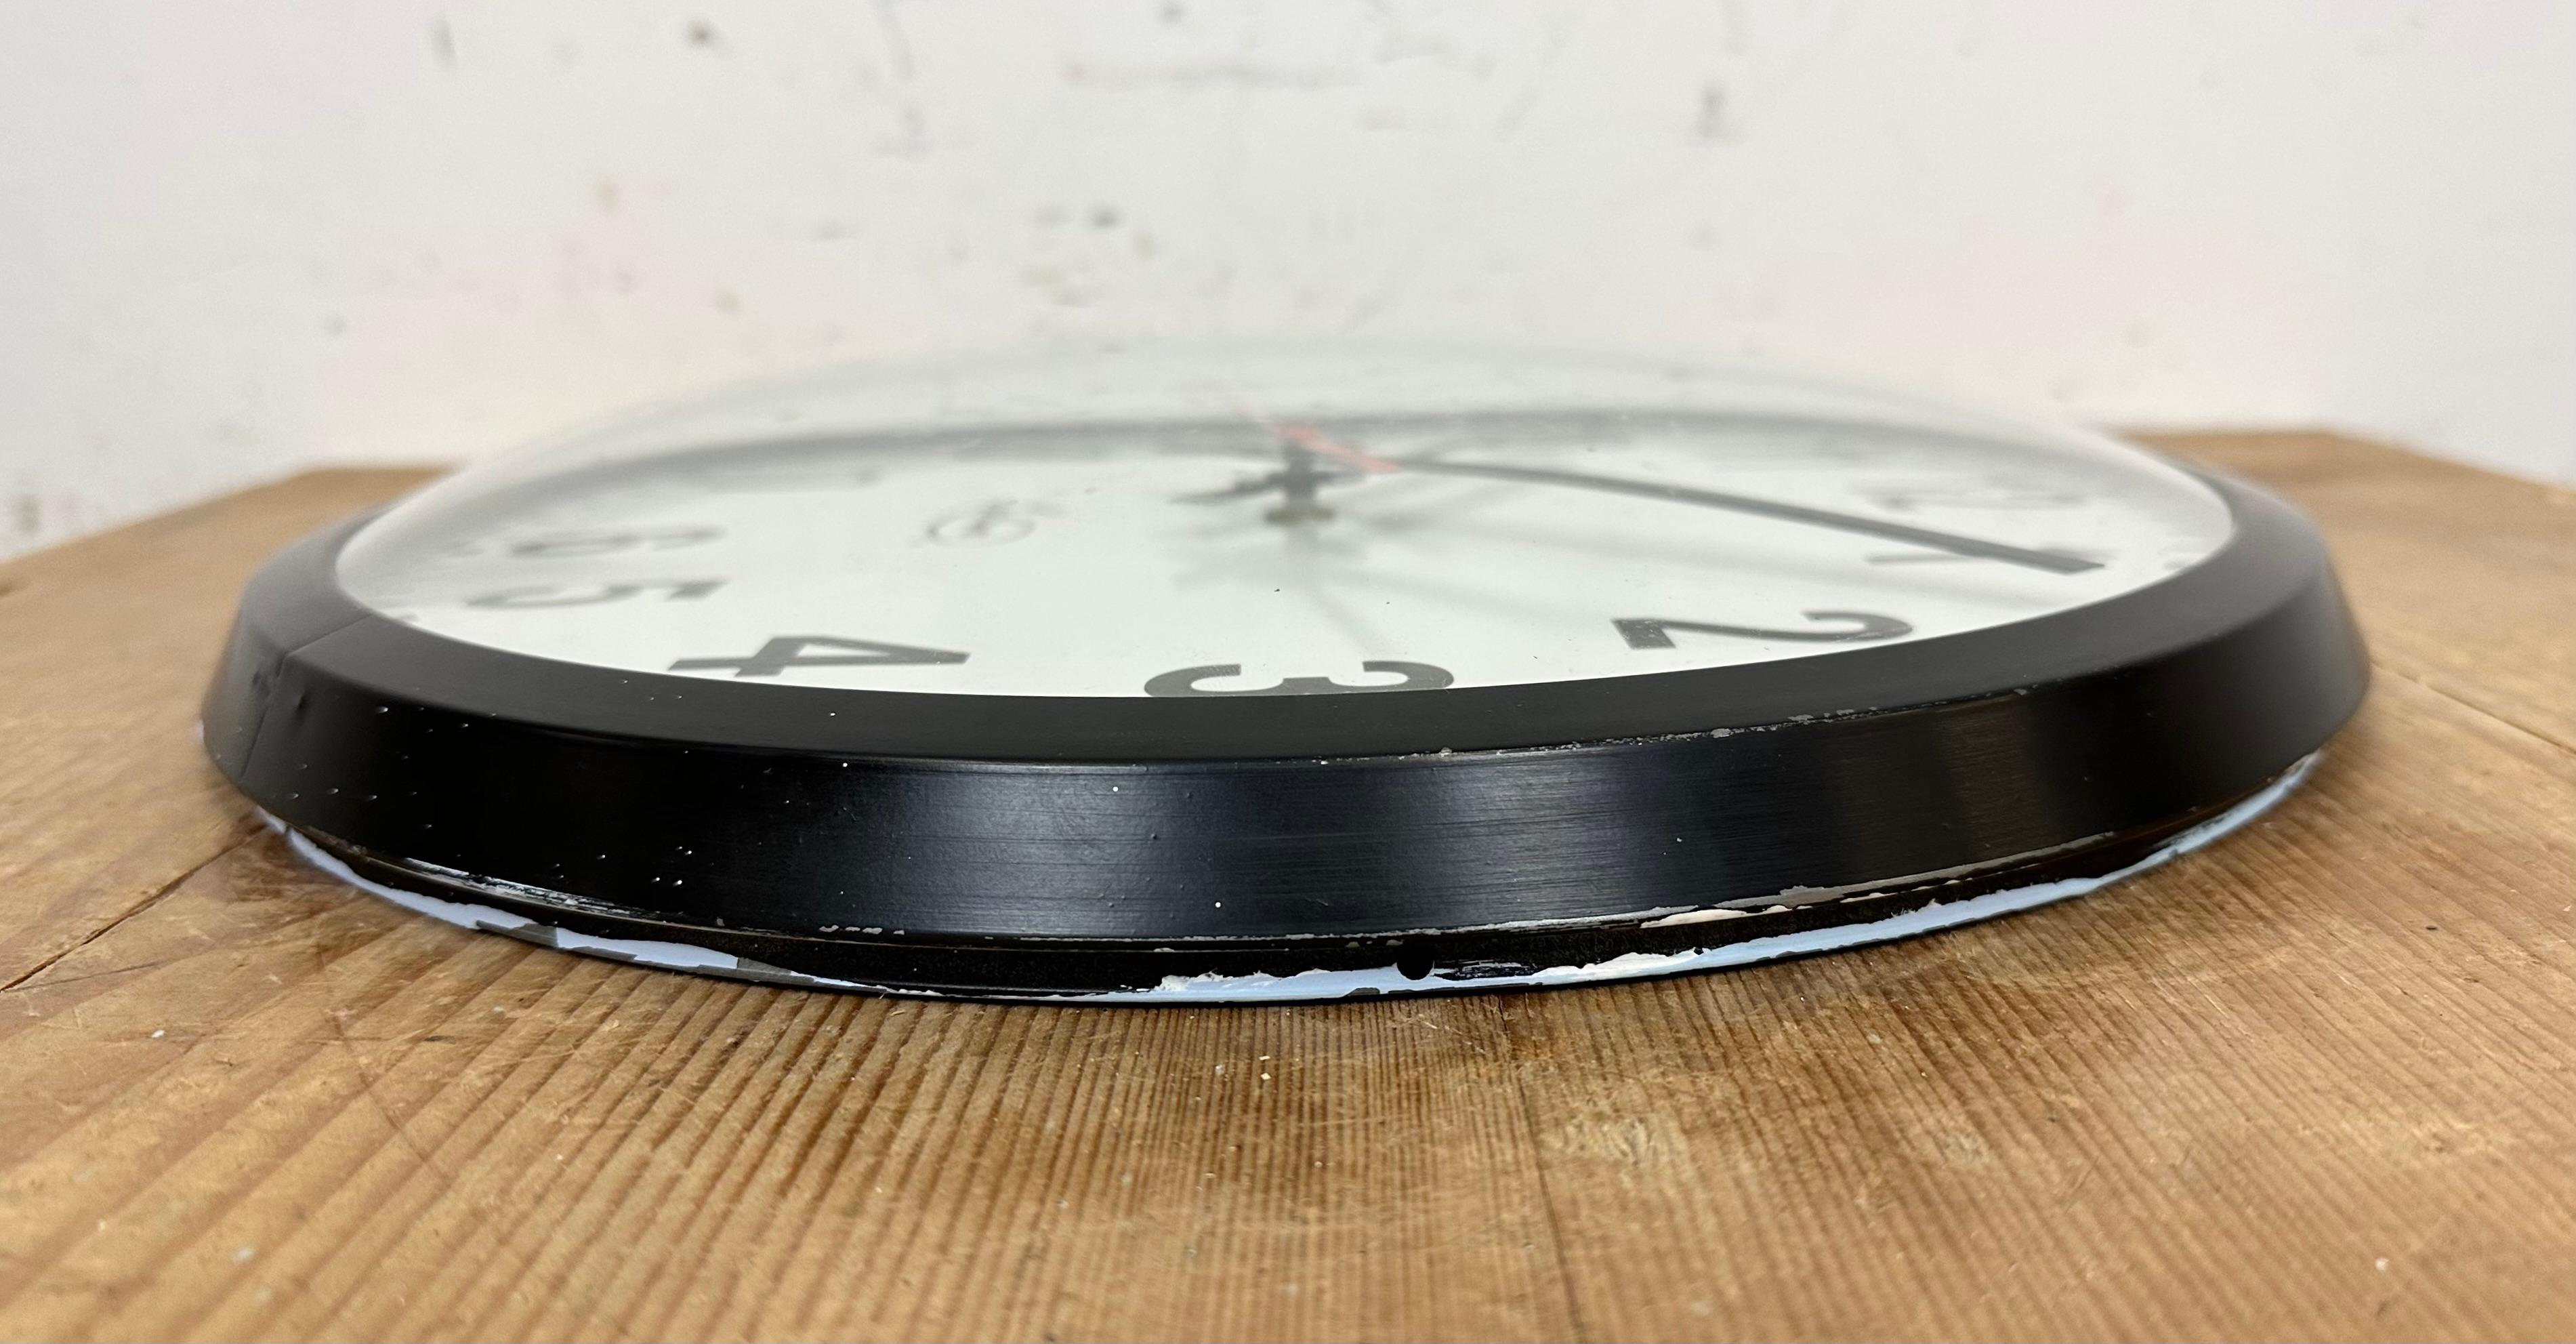 Vintage Black School Wall Clock from Lathem, 1980s For Sale 2